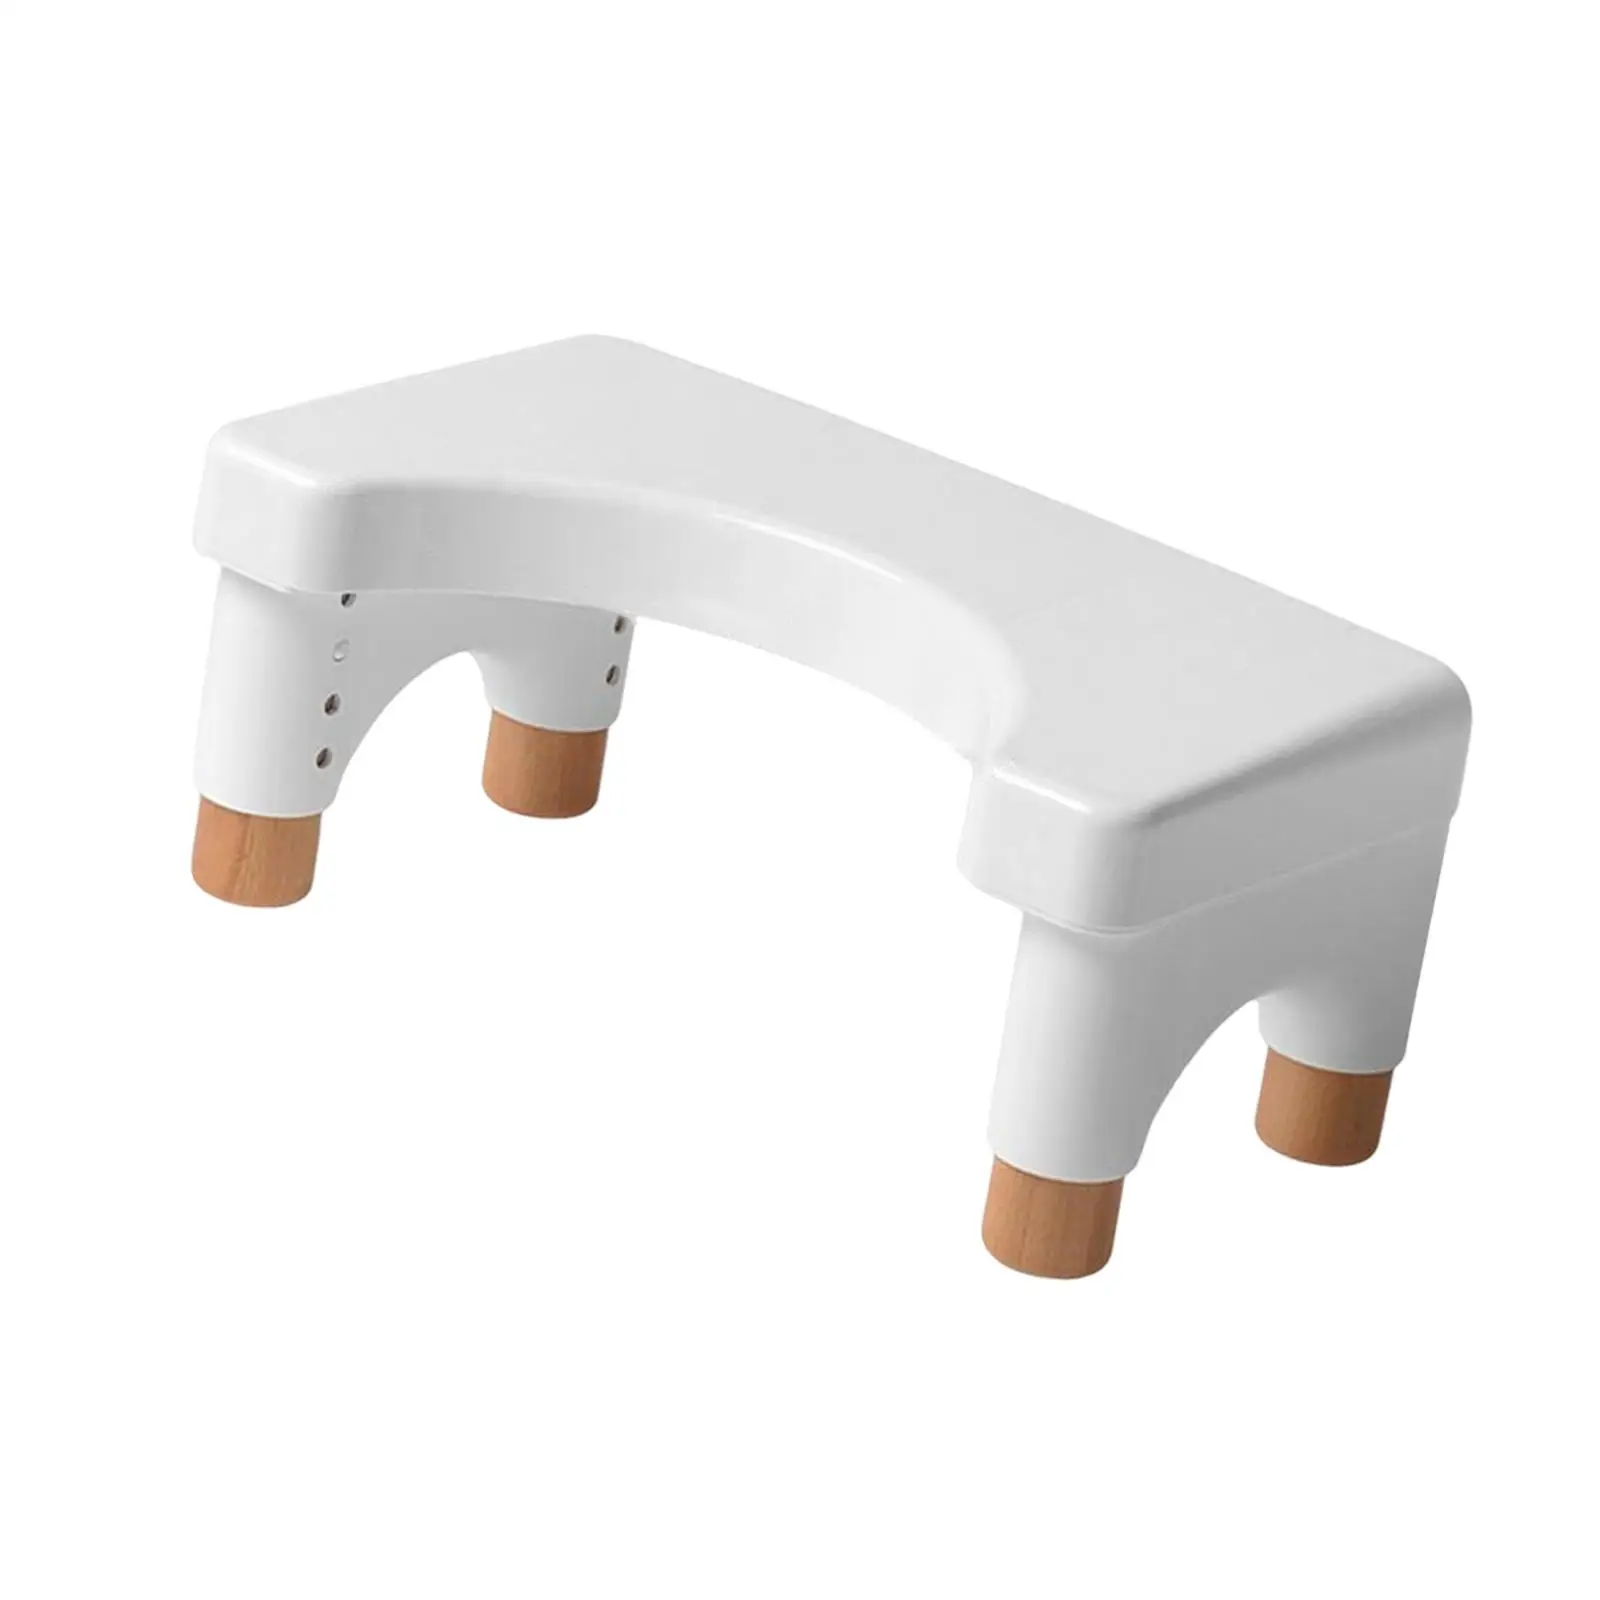 Toilet Seat Stool Height Adjustment Potty Stool under Desk Foot Rest Non Slip Bathroom Squating Stool for Teens Office Adults